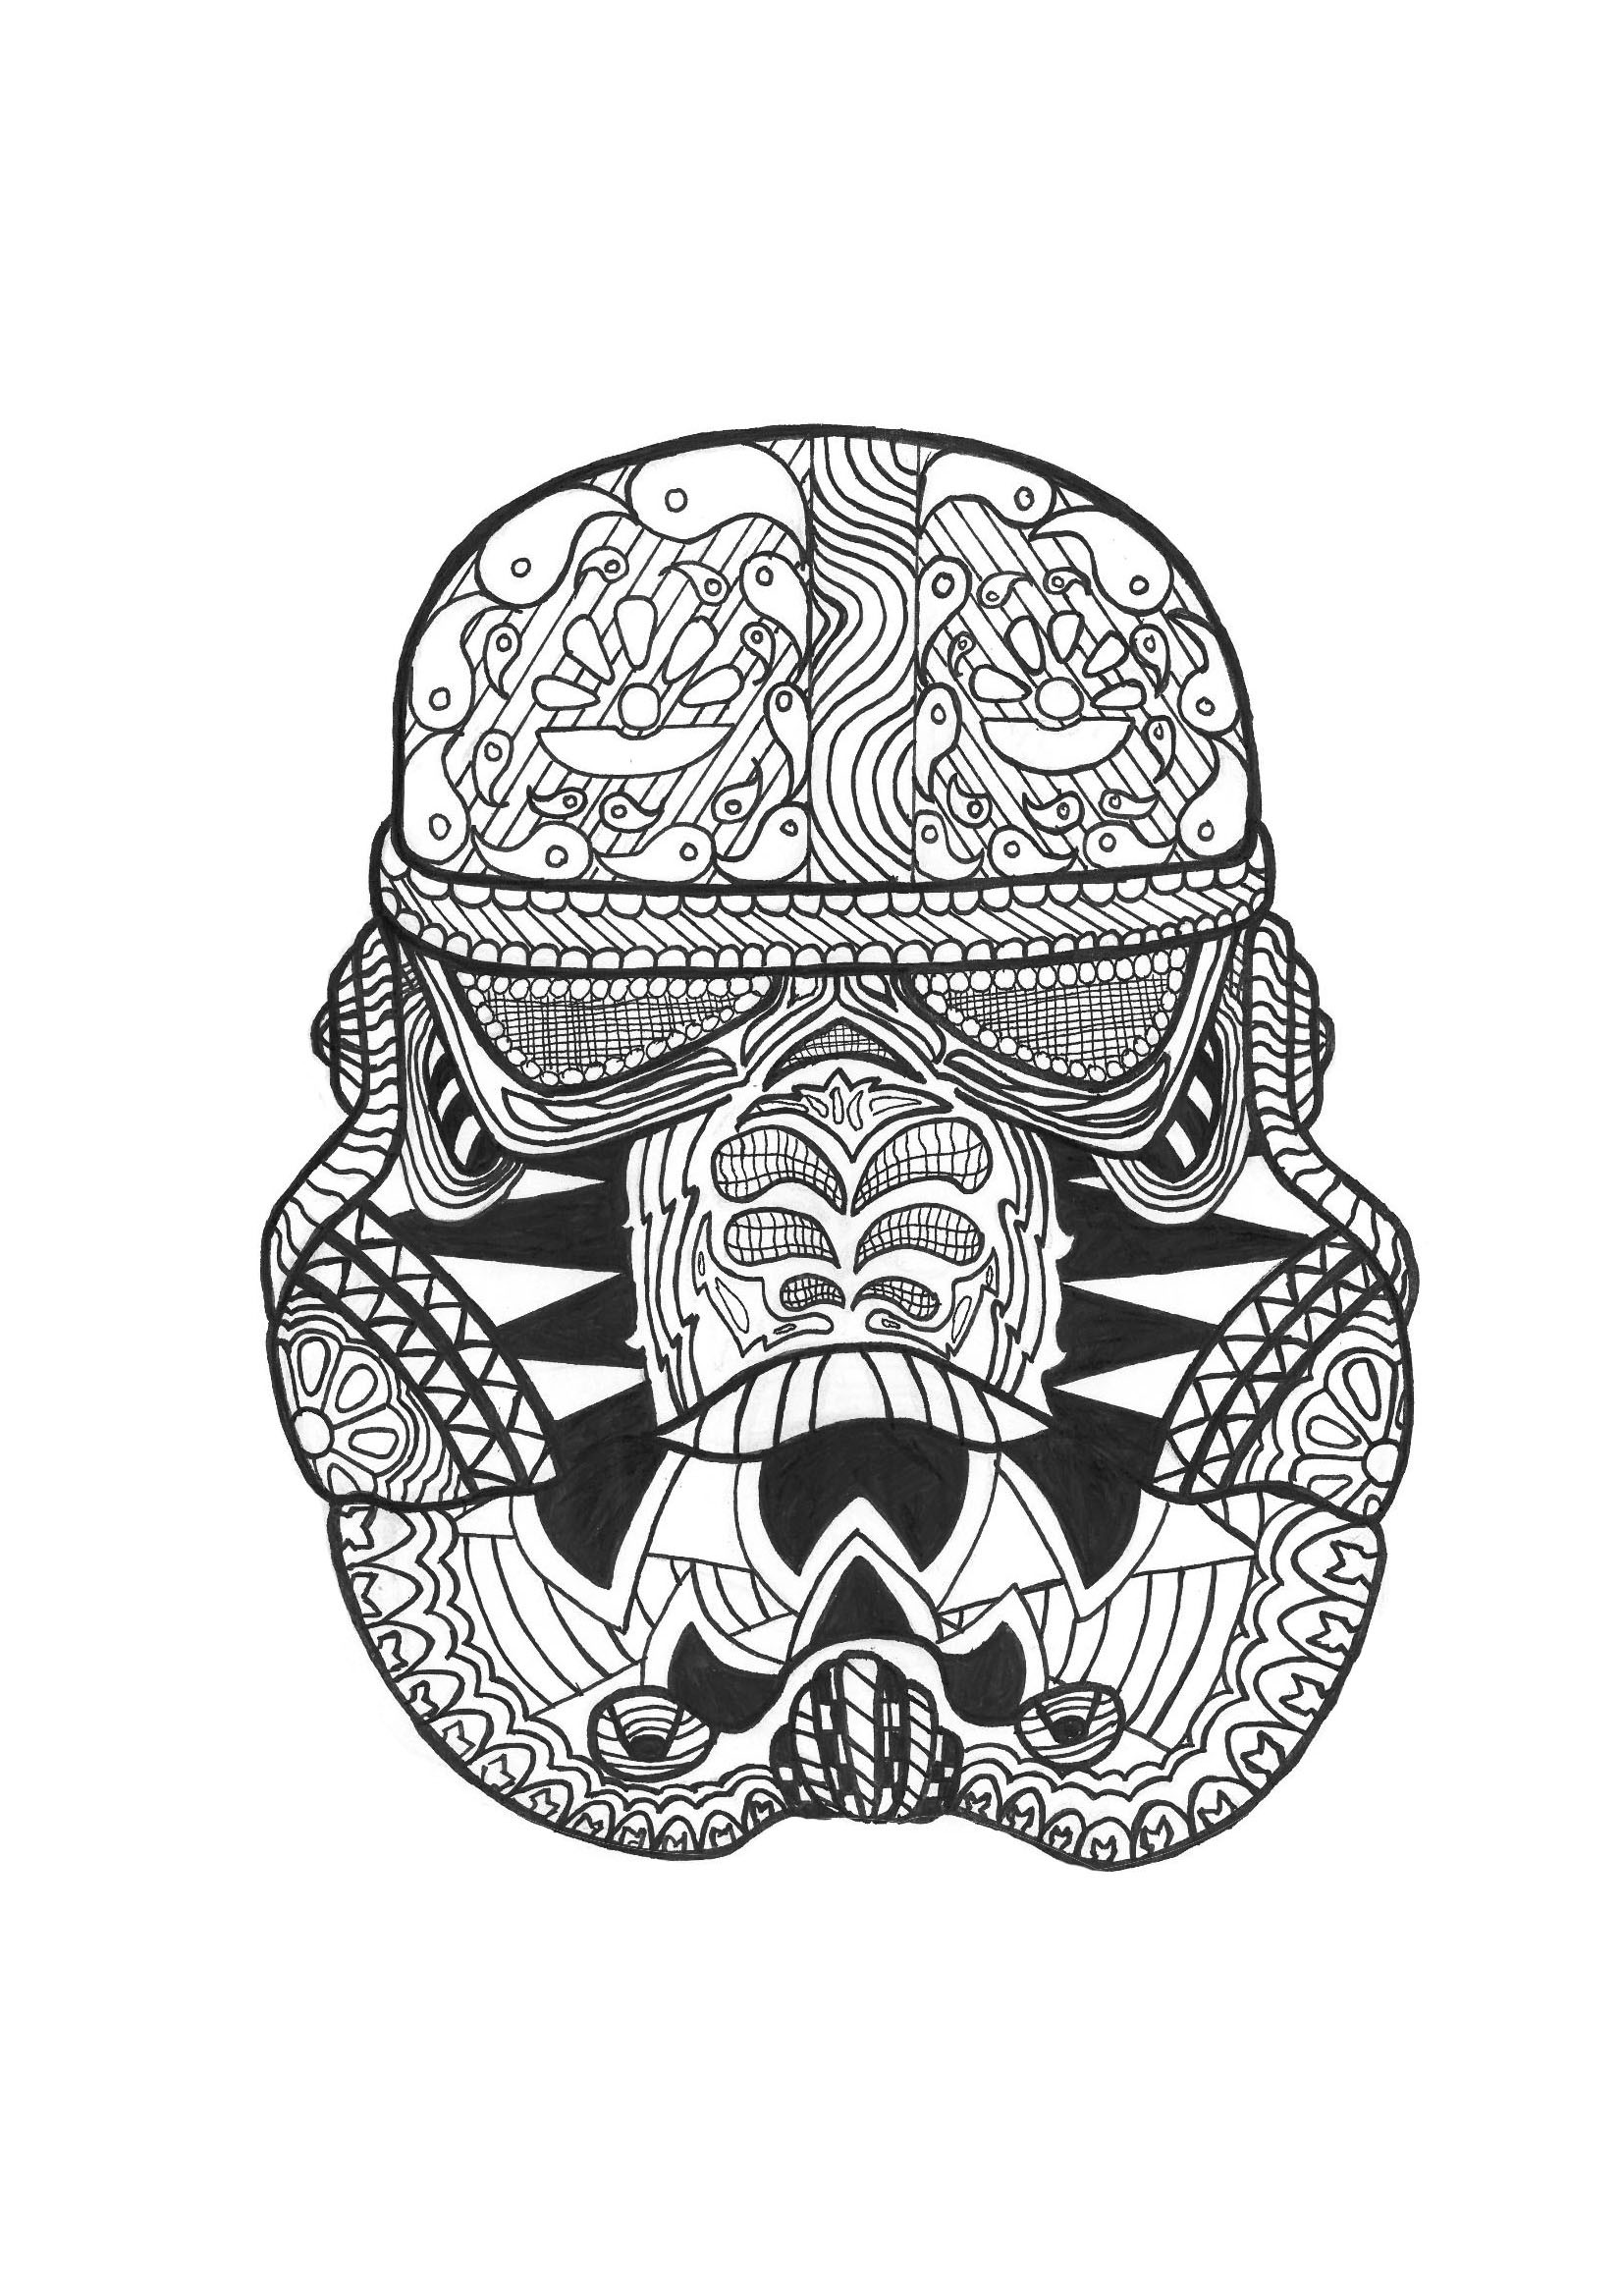 Coloring Pages For Adult Boys
 Zen stormtrooper Anti stress Adult Coloring Pages